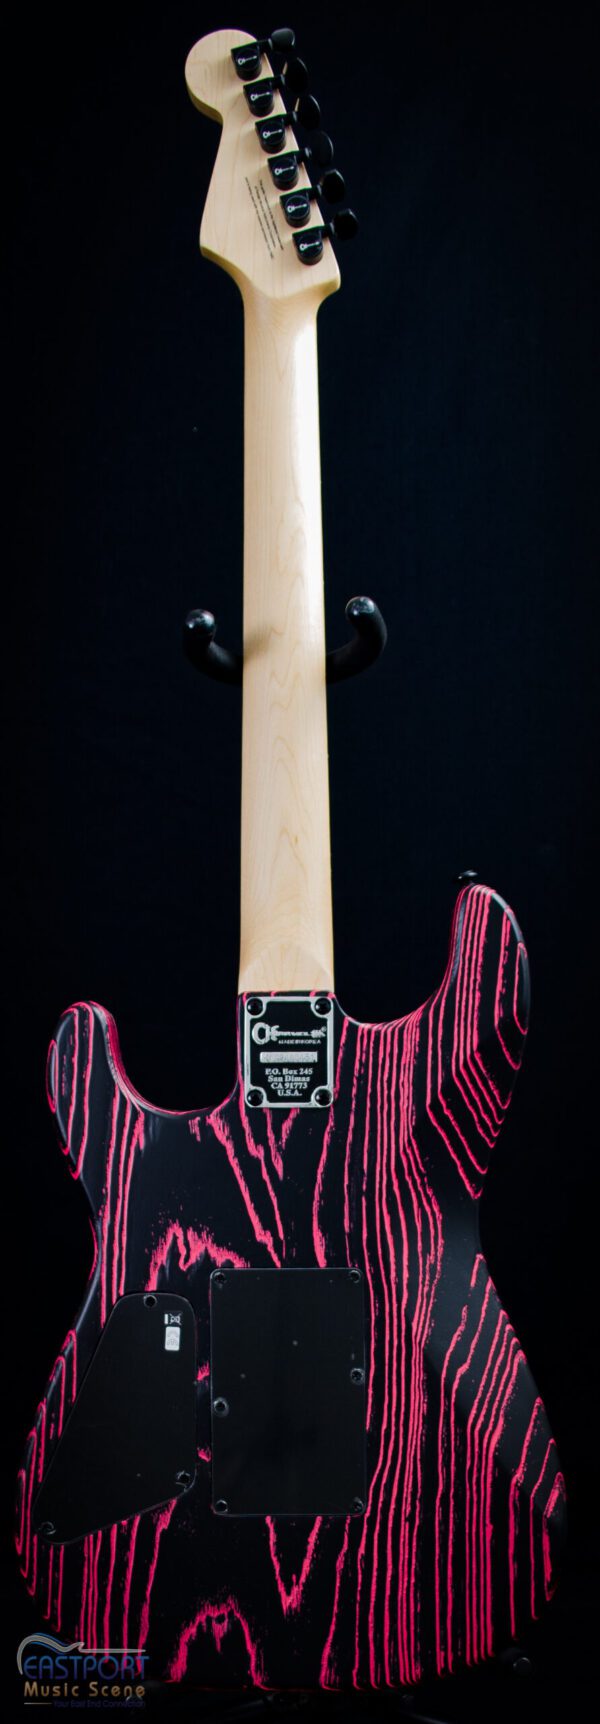 A pink and black electric guitar hanging on the wall